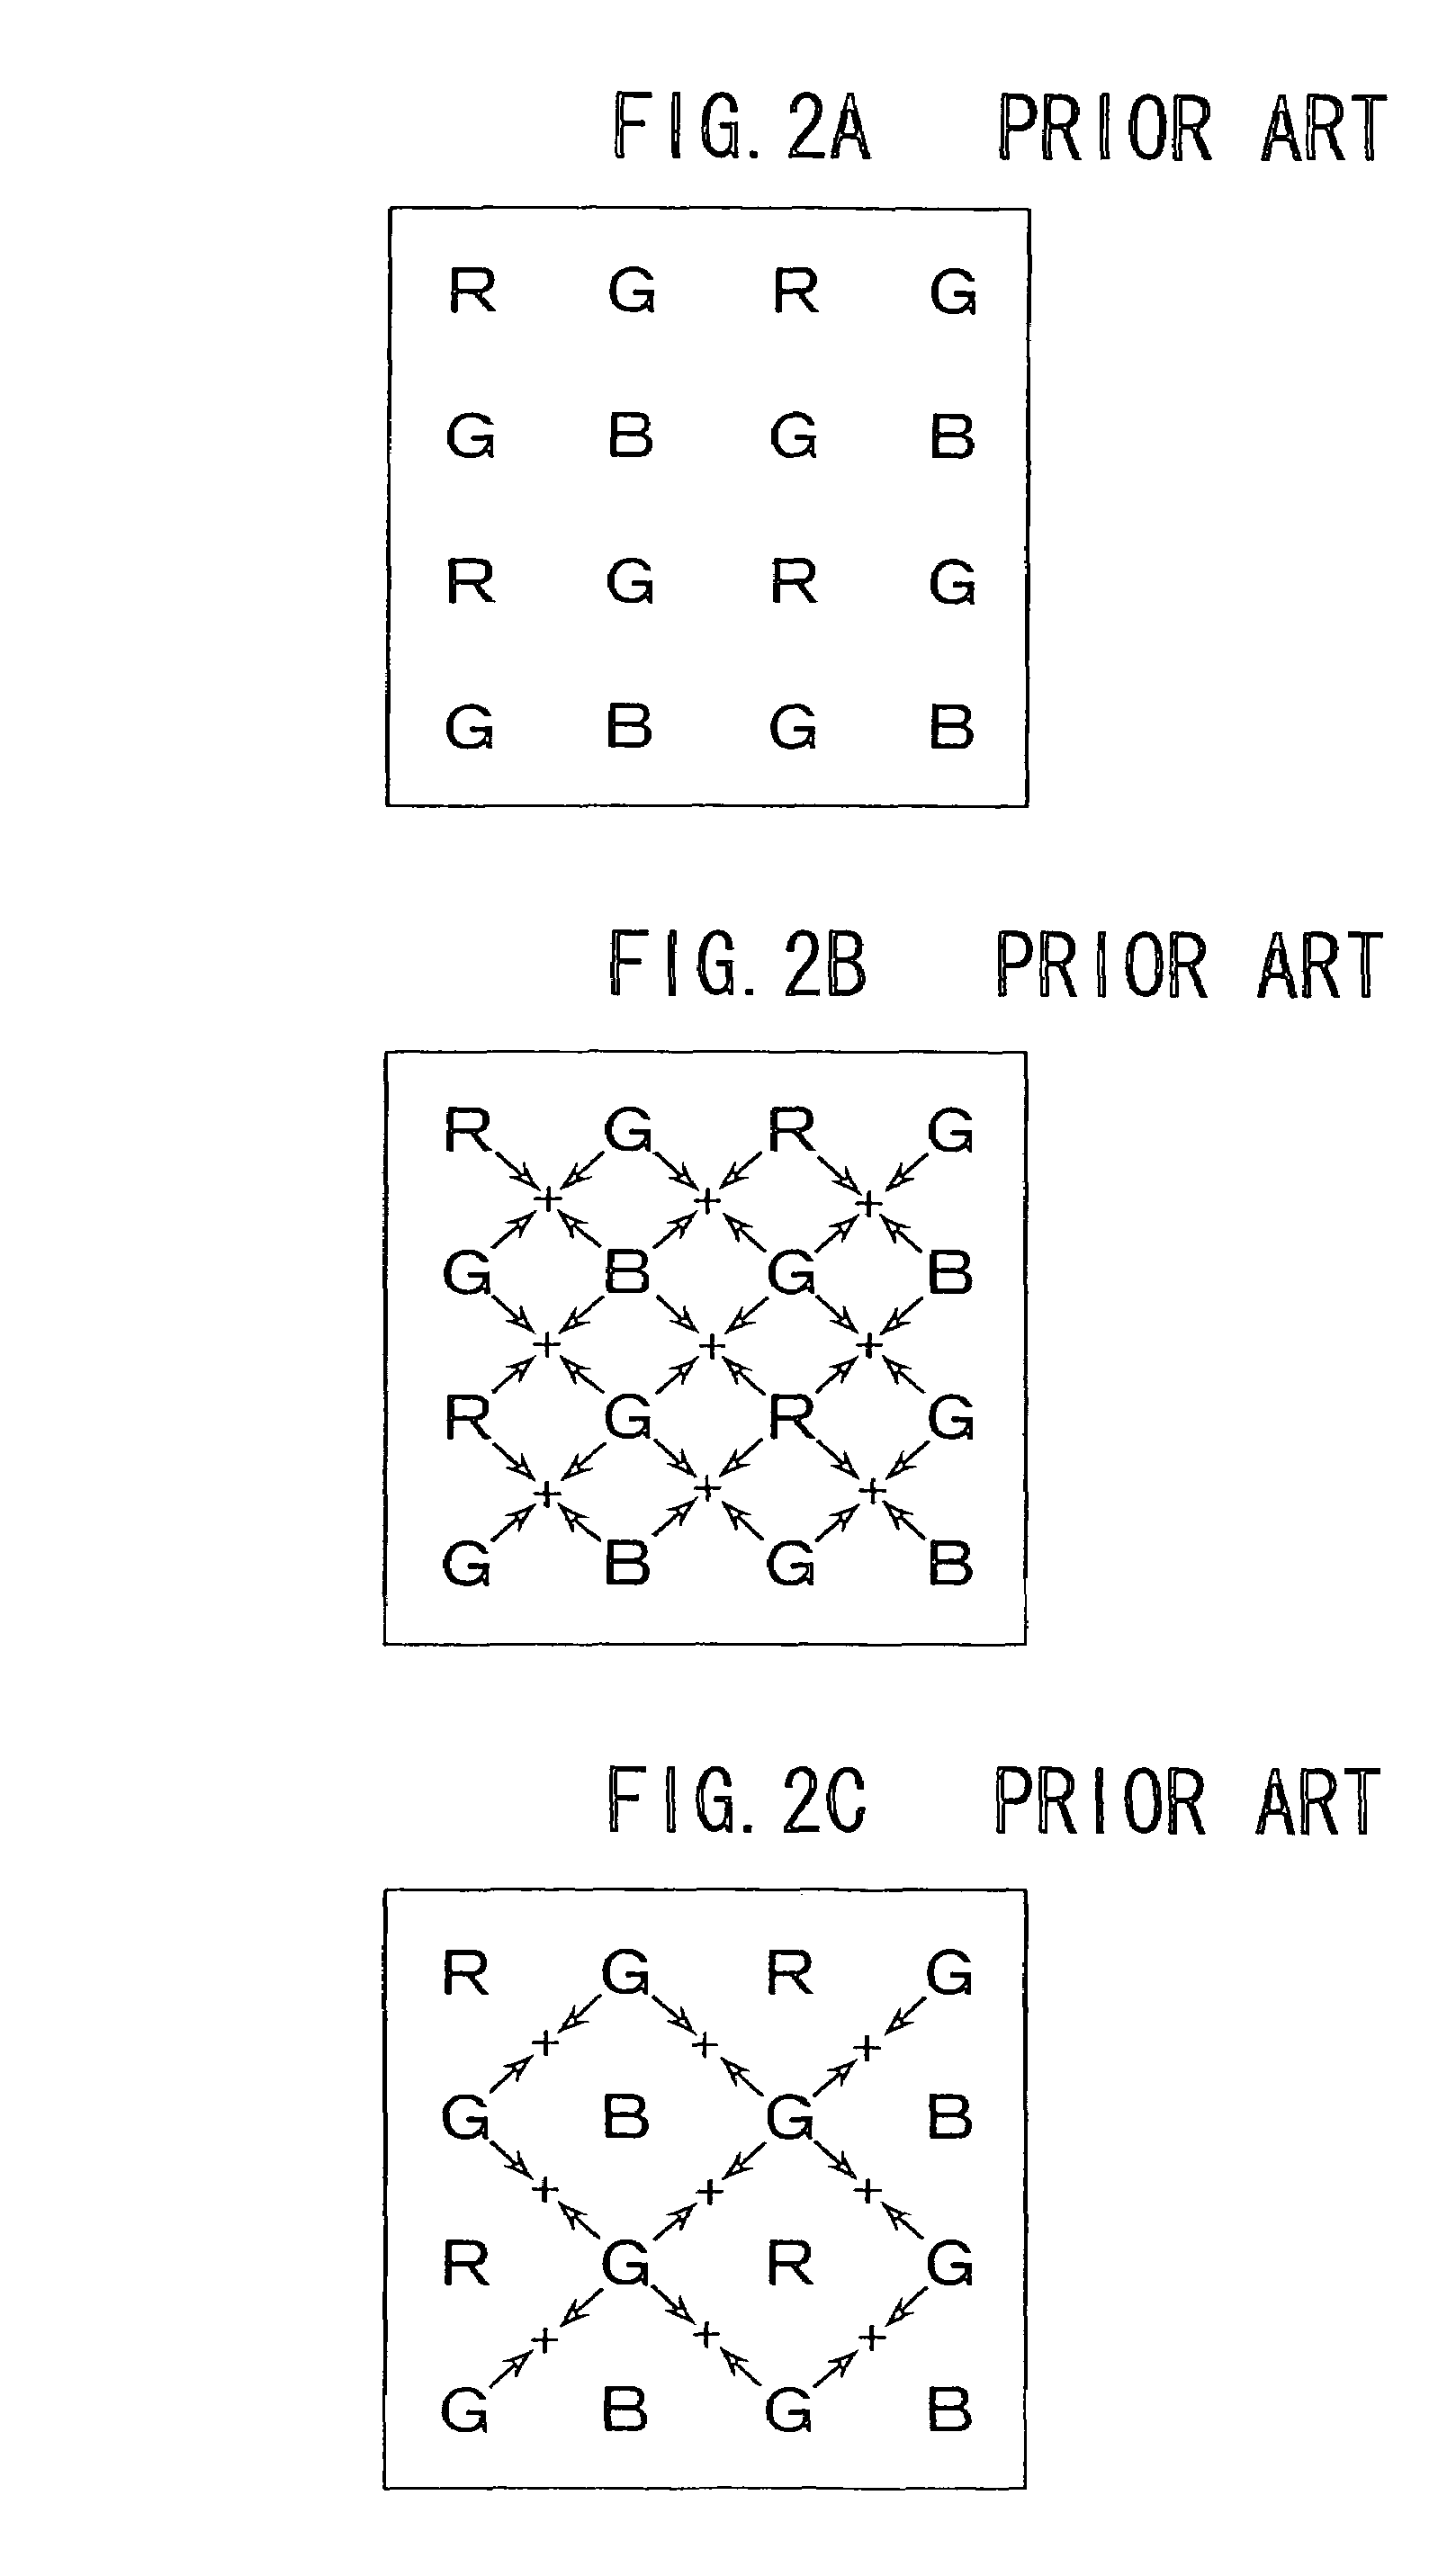 Image processing apparatus having a digital image processing section including enhancement of edges in an image